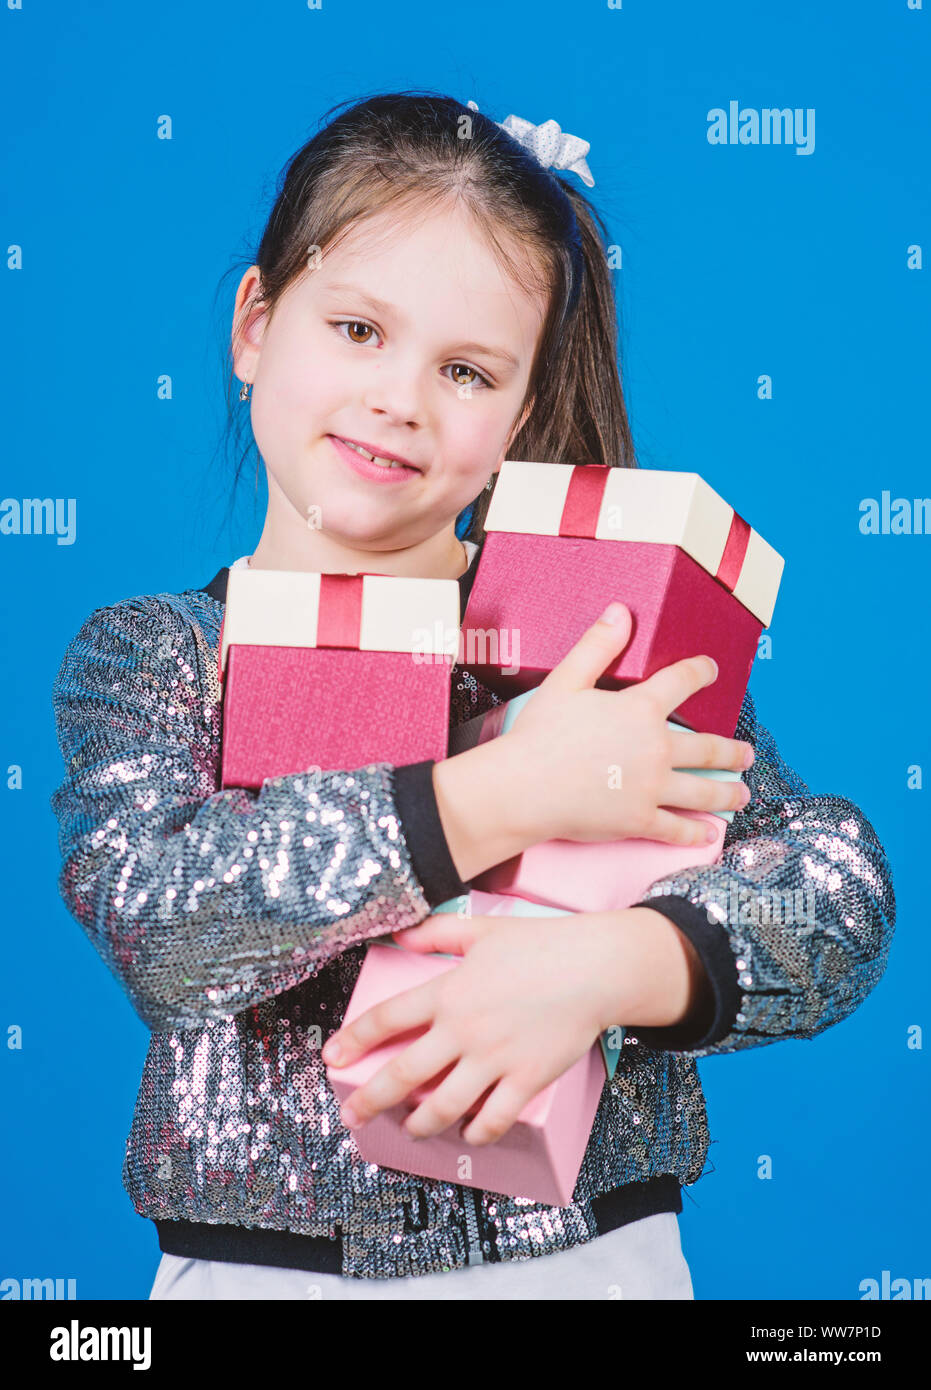 Shop for what you want. Girl with gift boxes blue background. Black friday. Shopping day. Child carry lot gift boxes. Kids fashion. Surprise gift box. Birthday wish list. Special happens every day. Stock Photo